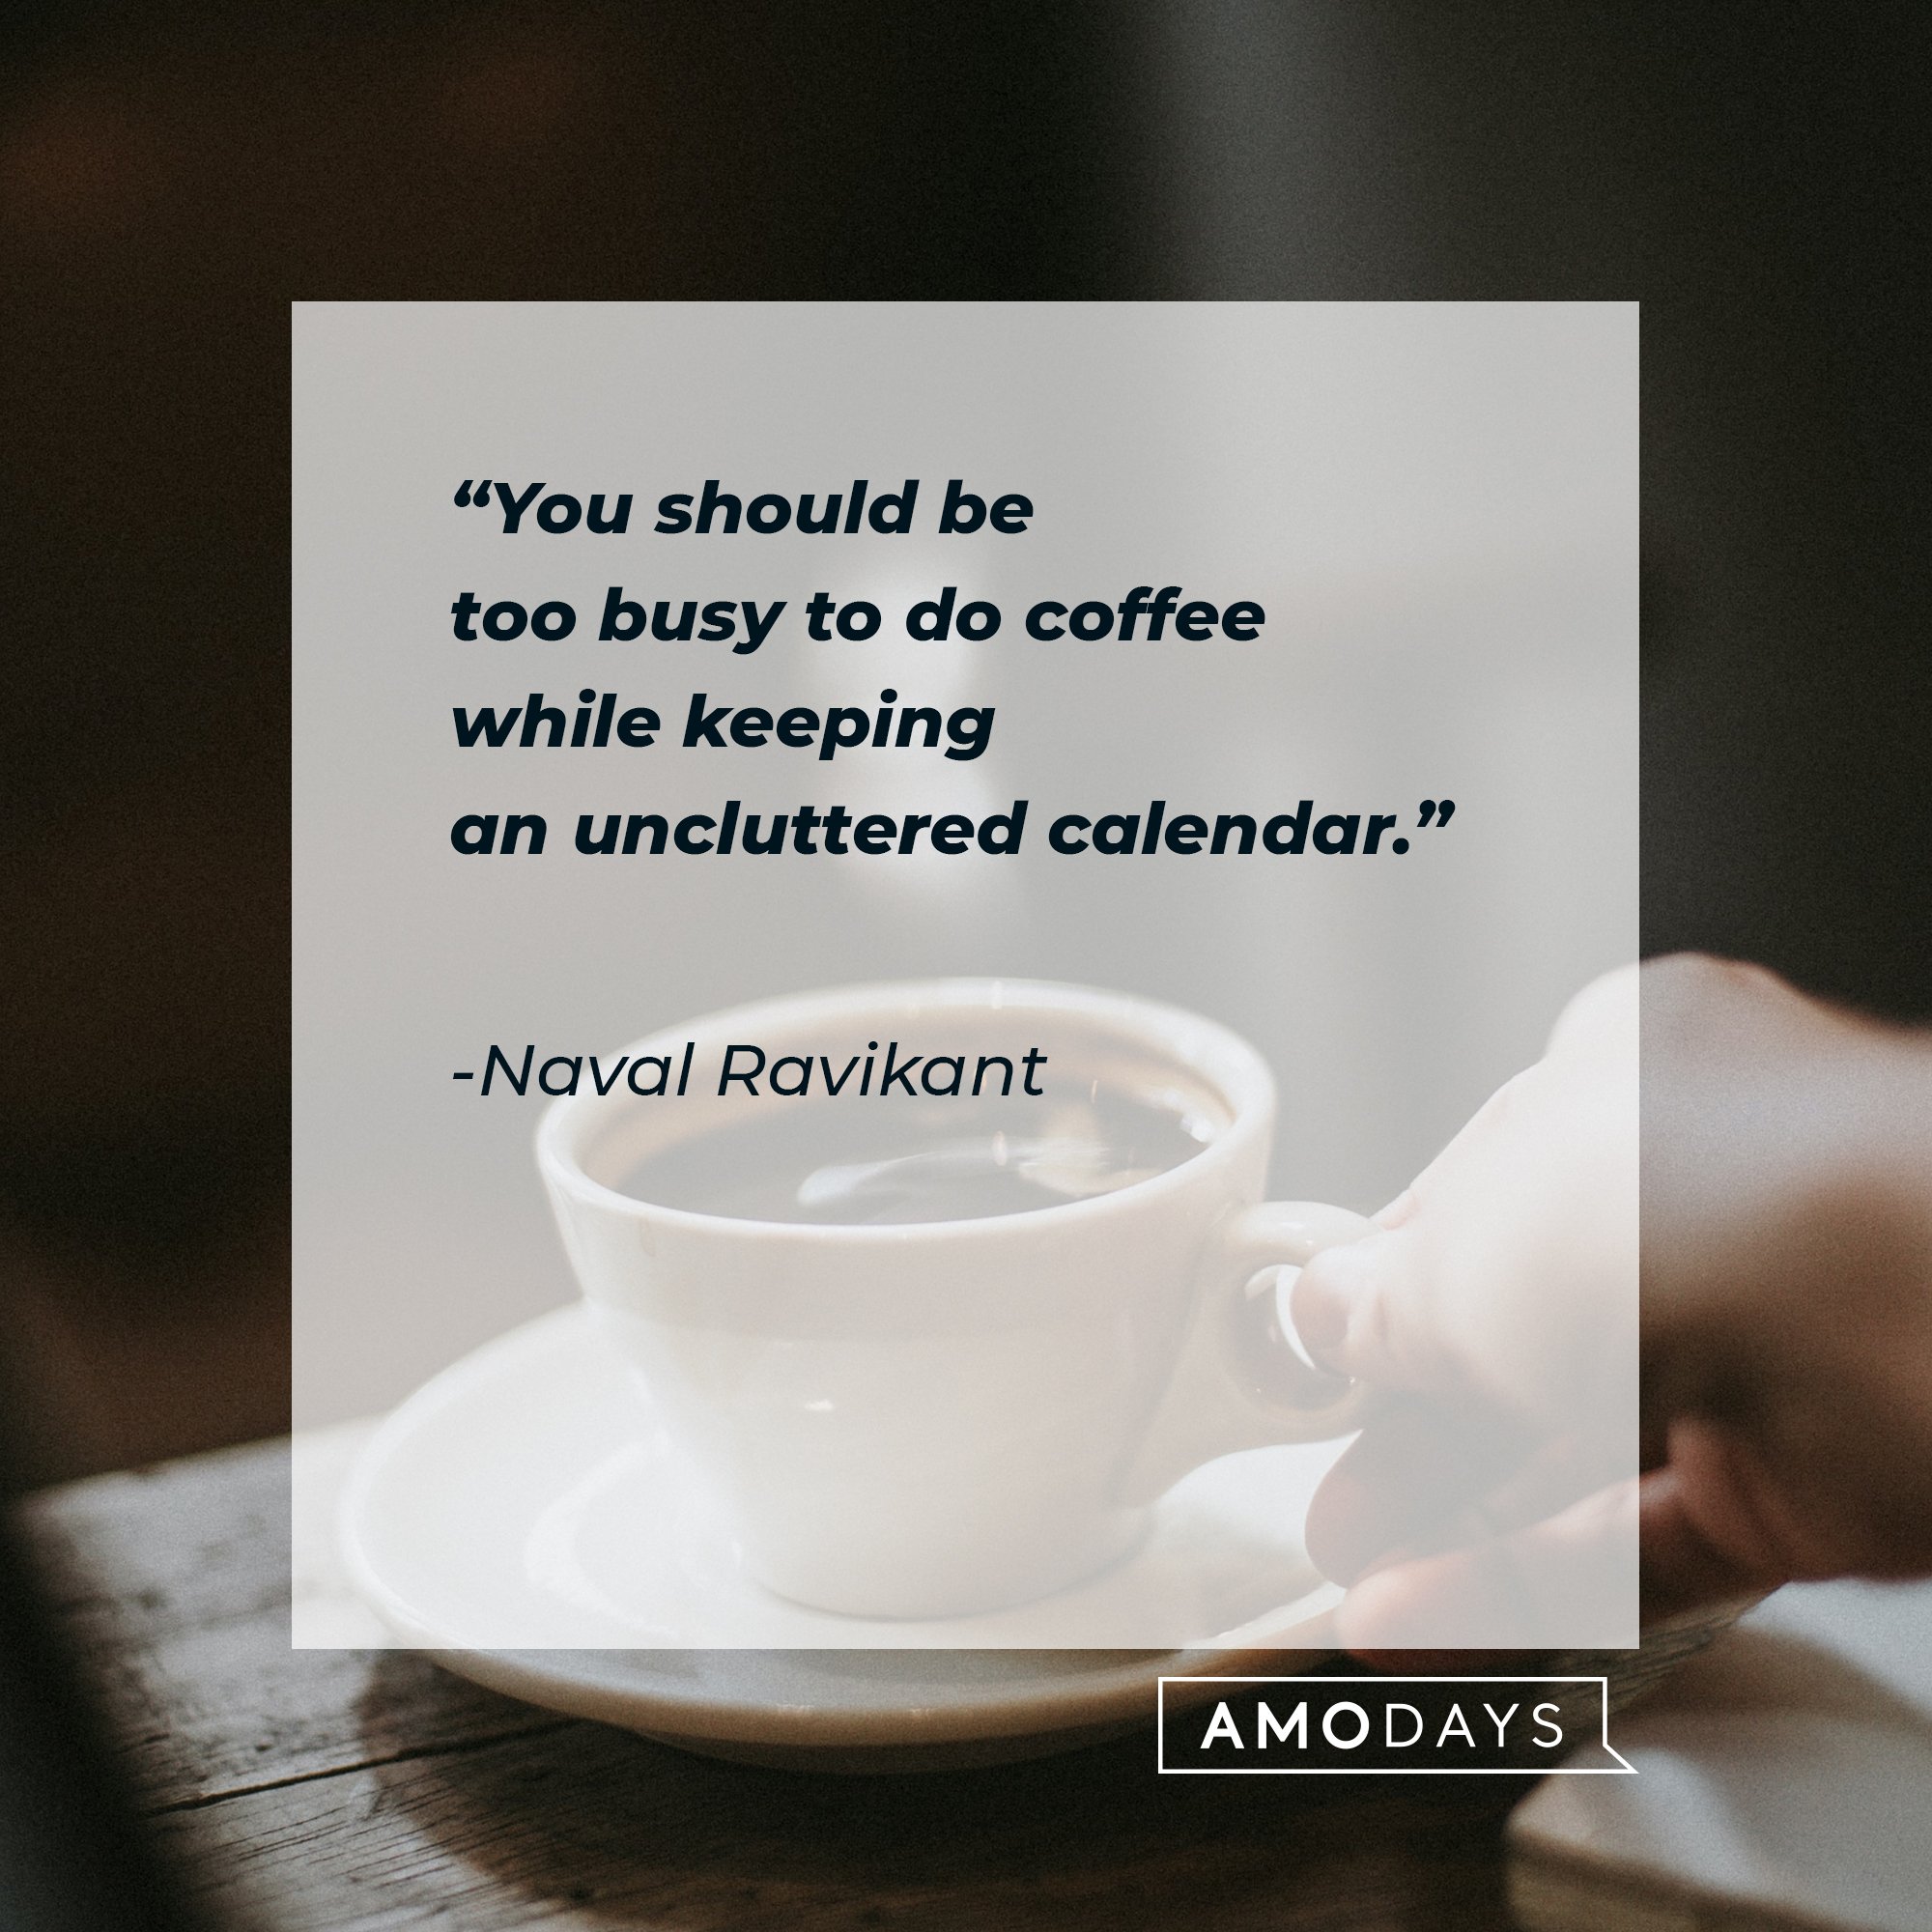 Naval Ravikant's quote: "You should be too busy to do coffee while keeping an uncluttered calendar." | Image: AmoDays